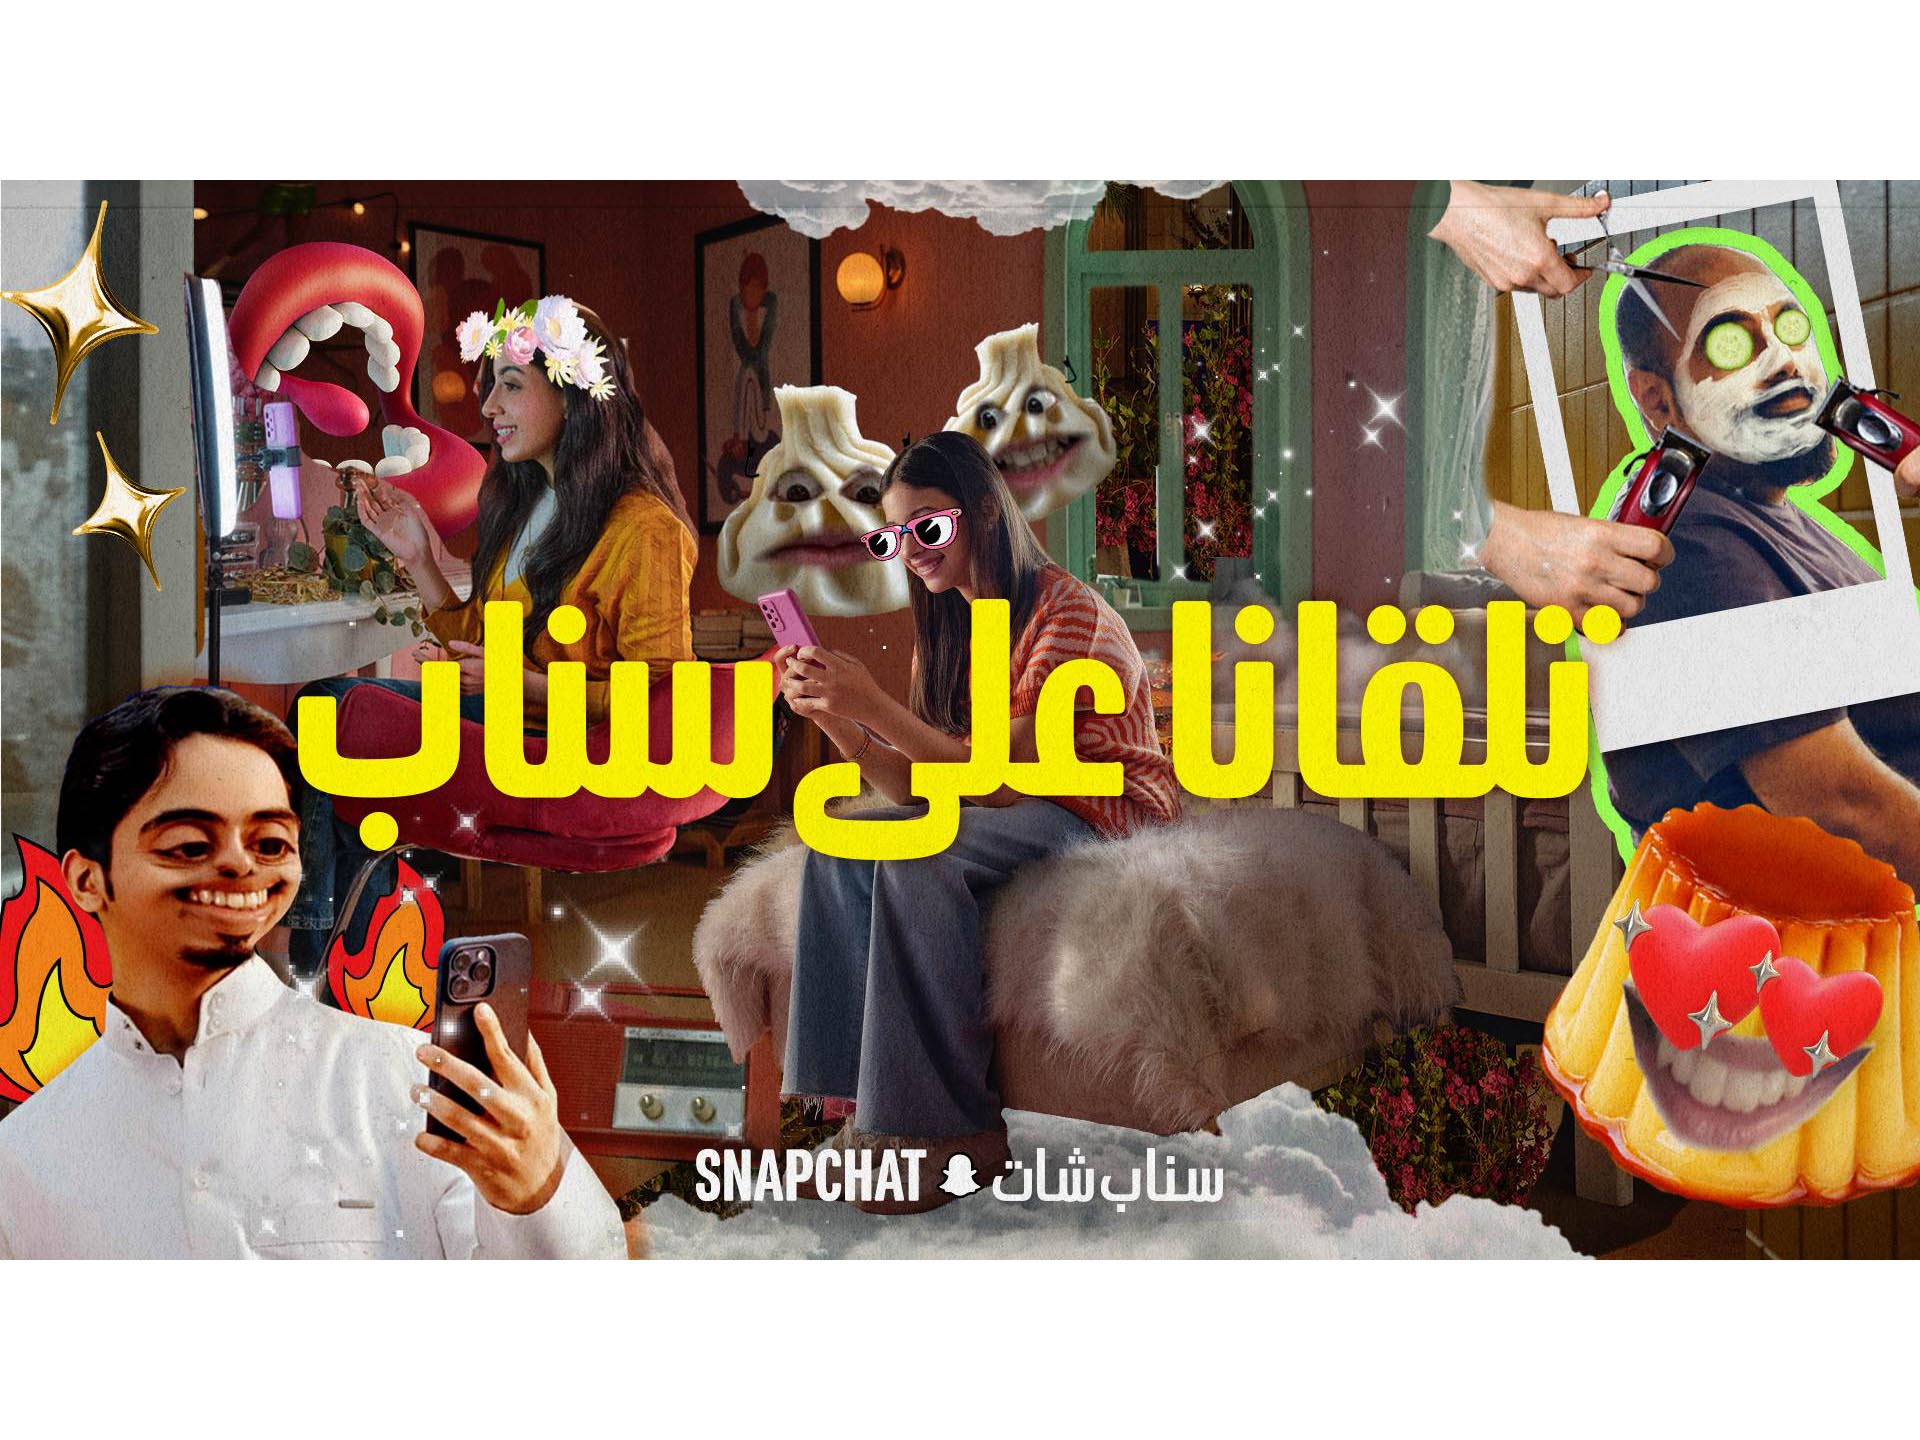 Snap celebrates its great role in the GCC culture through new campaign